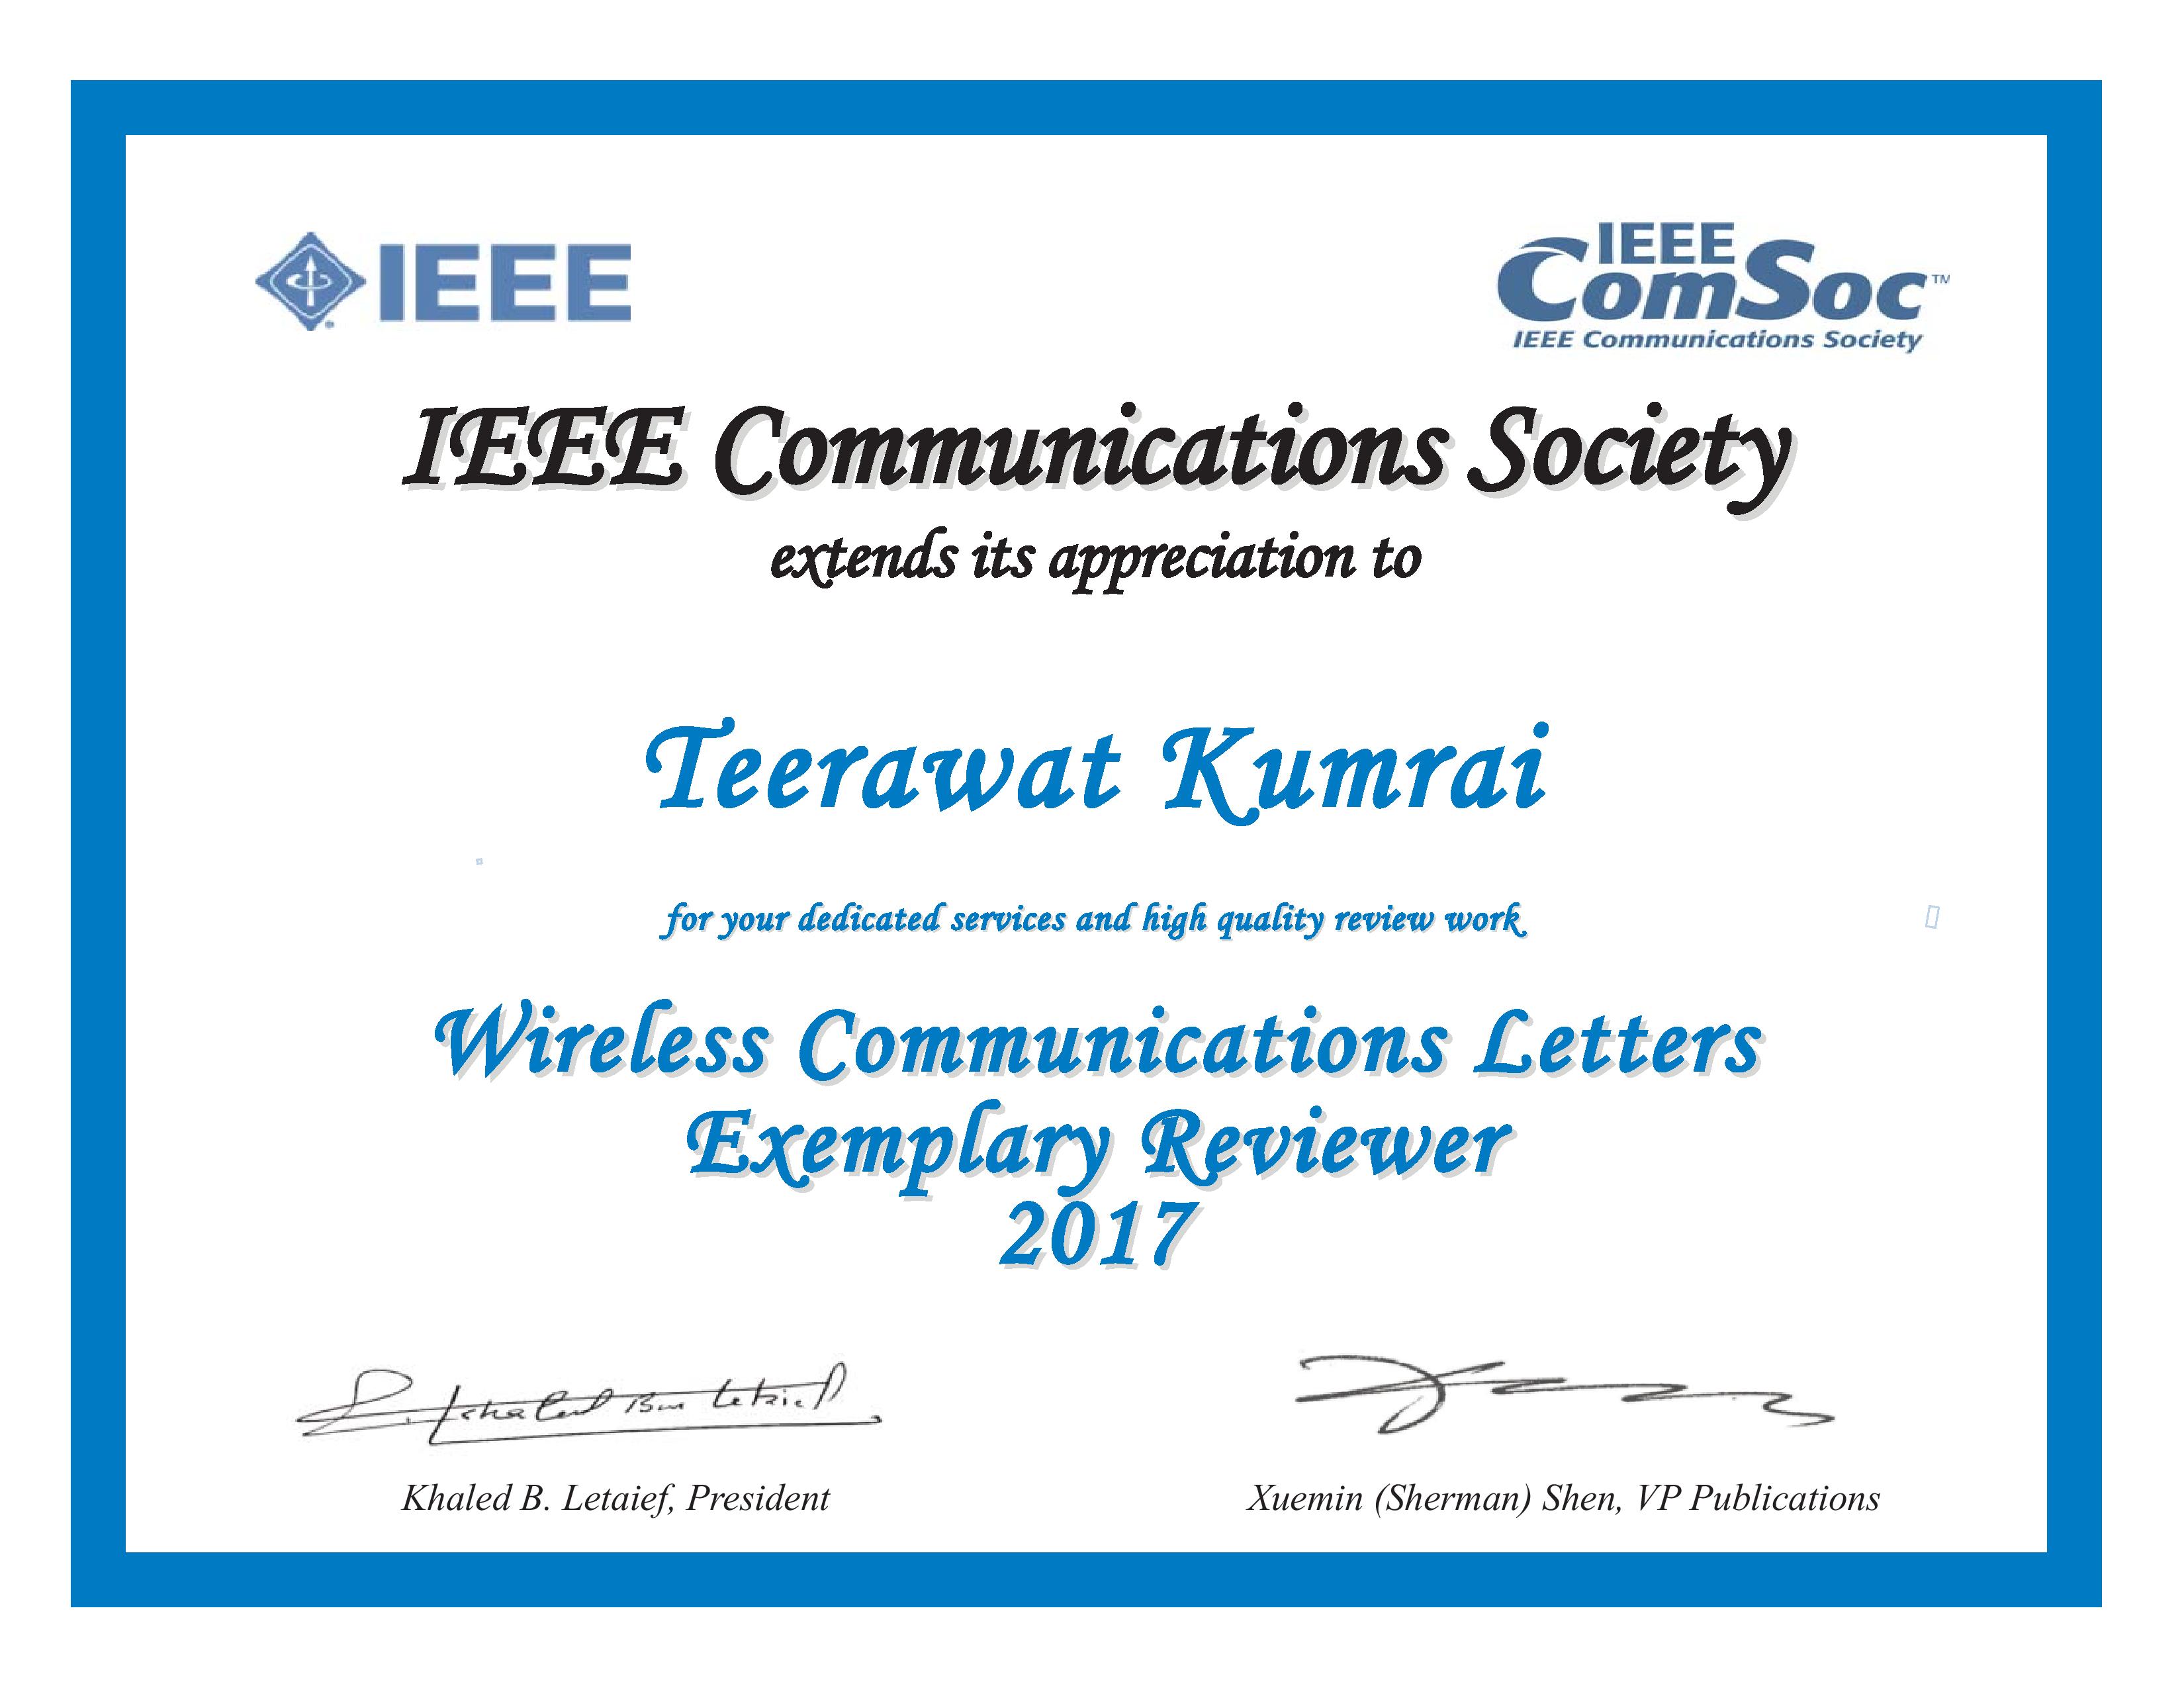 IEEE WCL Exemplary Reviewer 2017